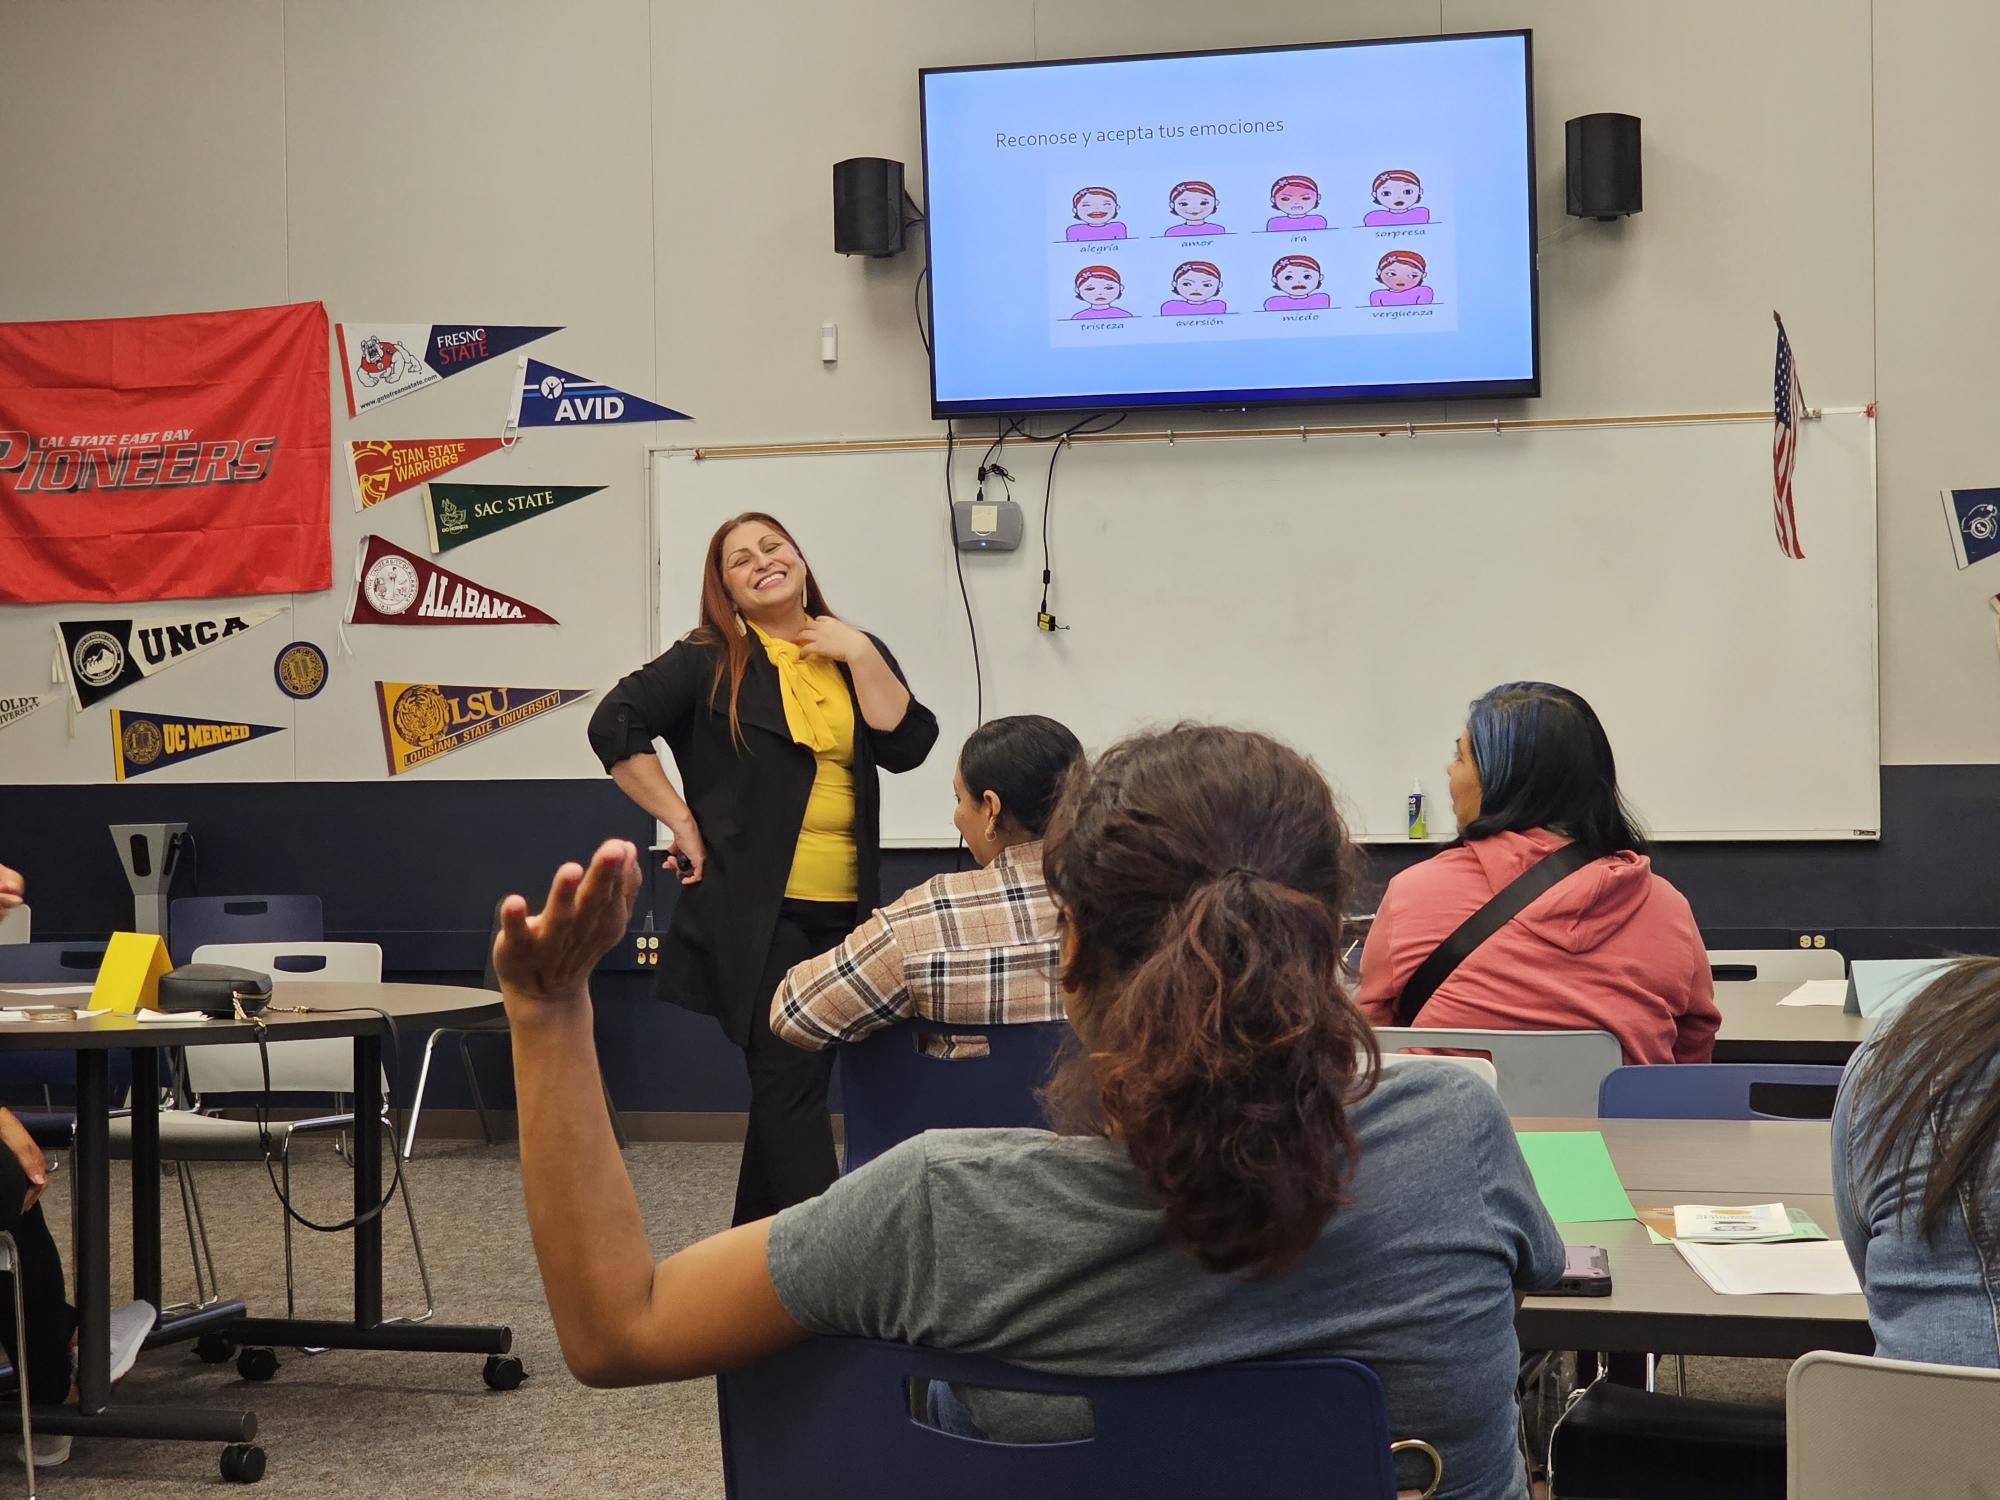 Presenter presenting to parents in meeting